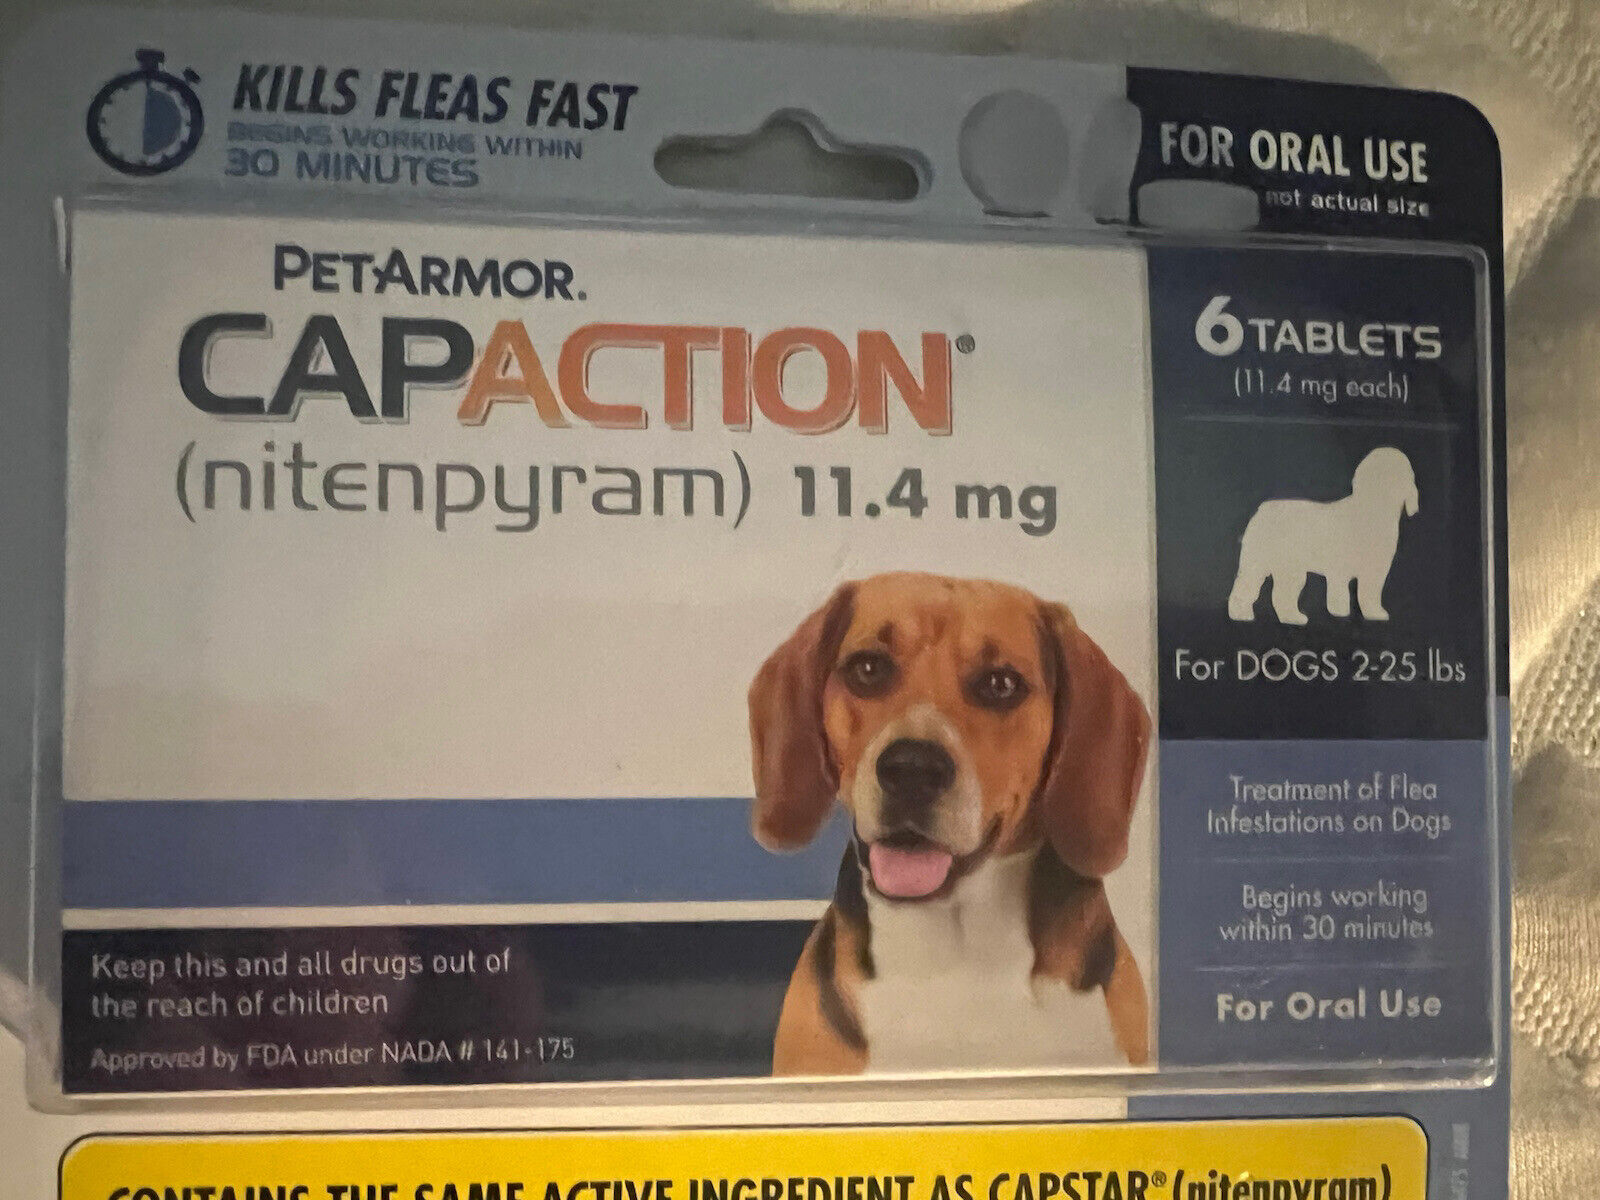 Petaction CAPACTION Fast Acting Oral Flea Treatment Dogs 2-25lbs  73091033103 | eBay